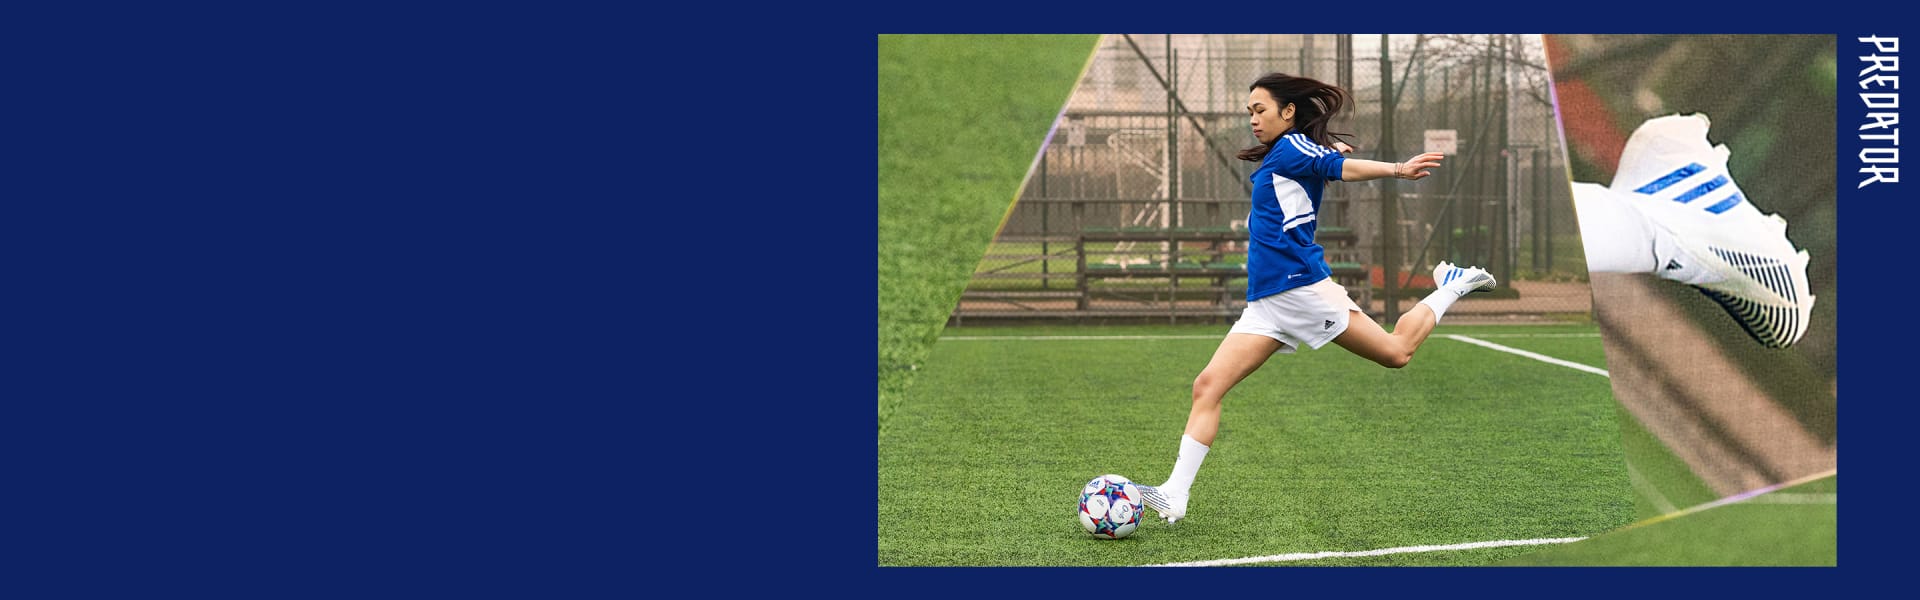 Image of female player, blue and white kit, kicking the ball on the pitch.